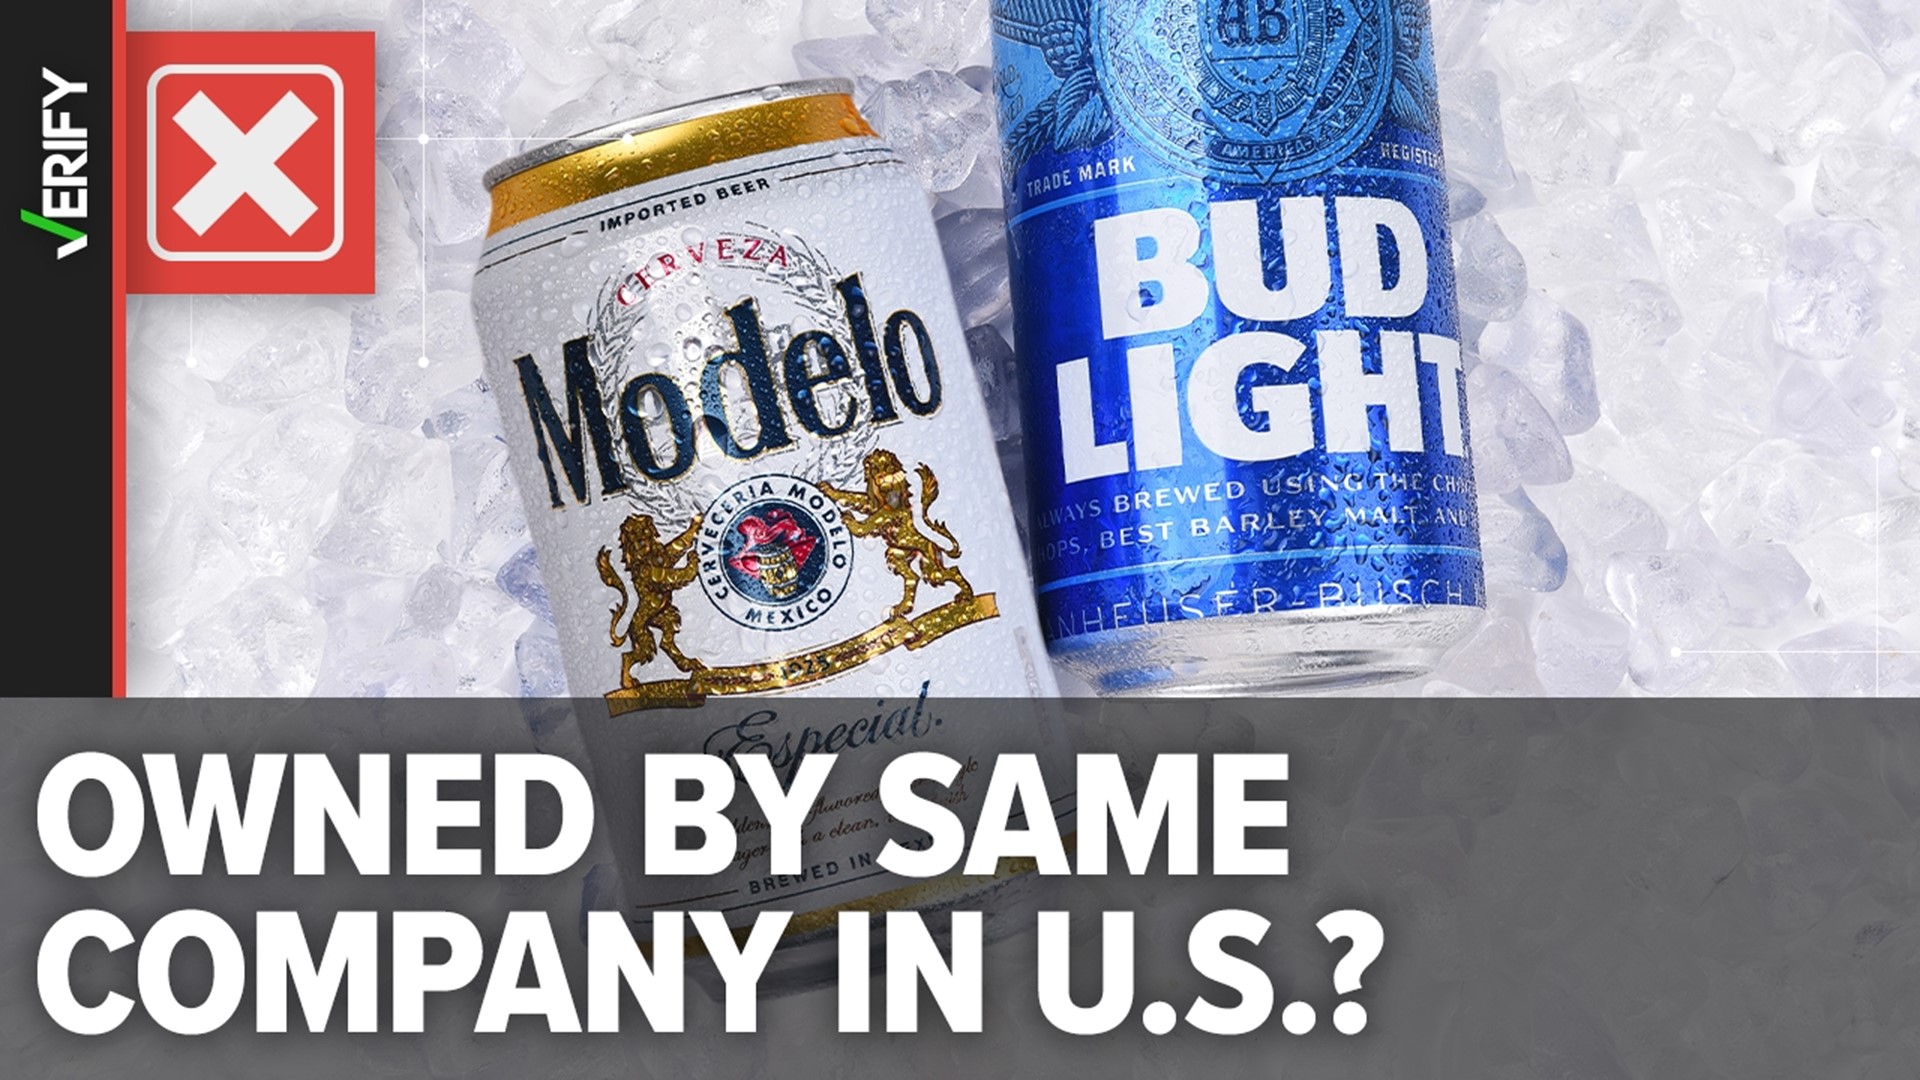 Here's why Constellation Brands bet big on Modelo and beat Bud Light